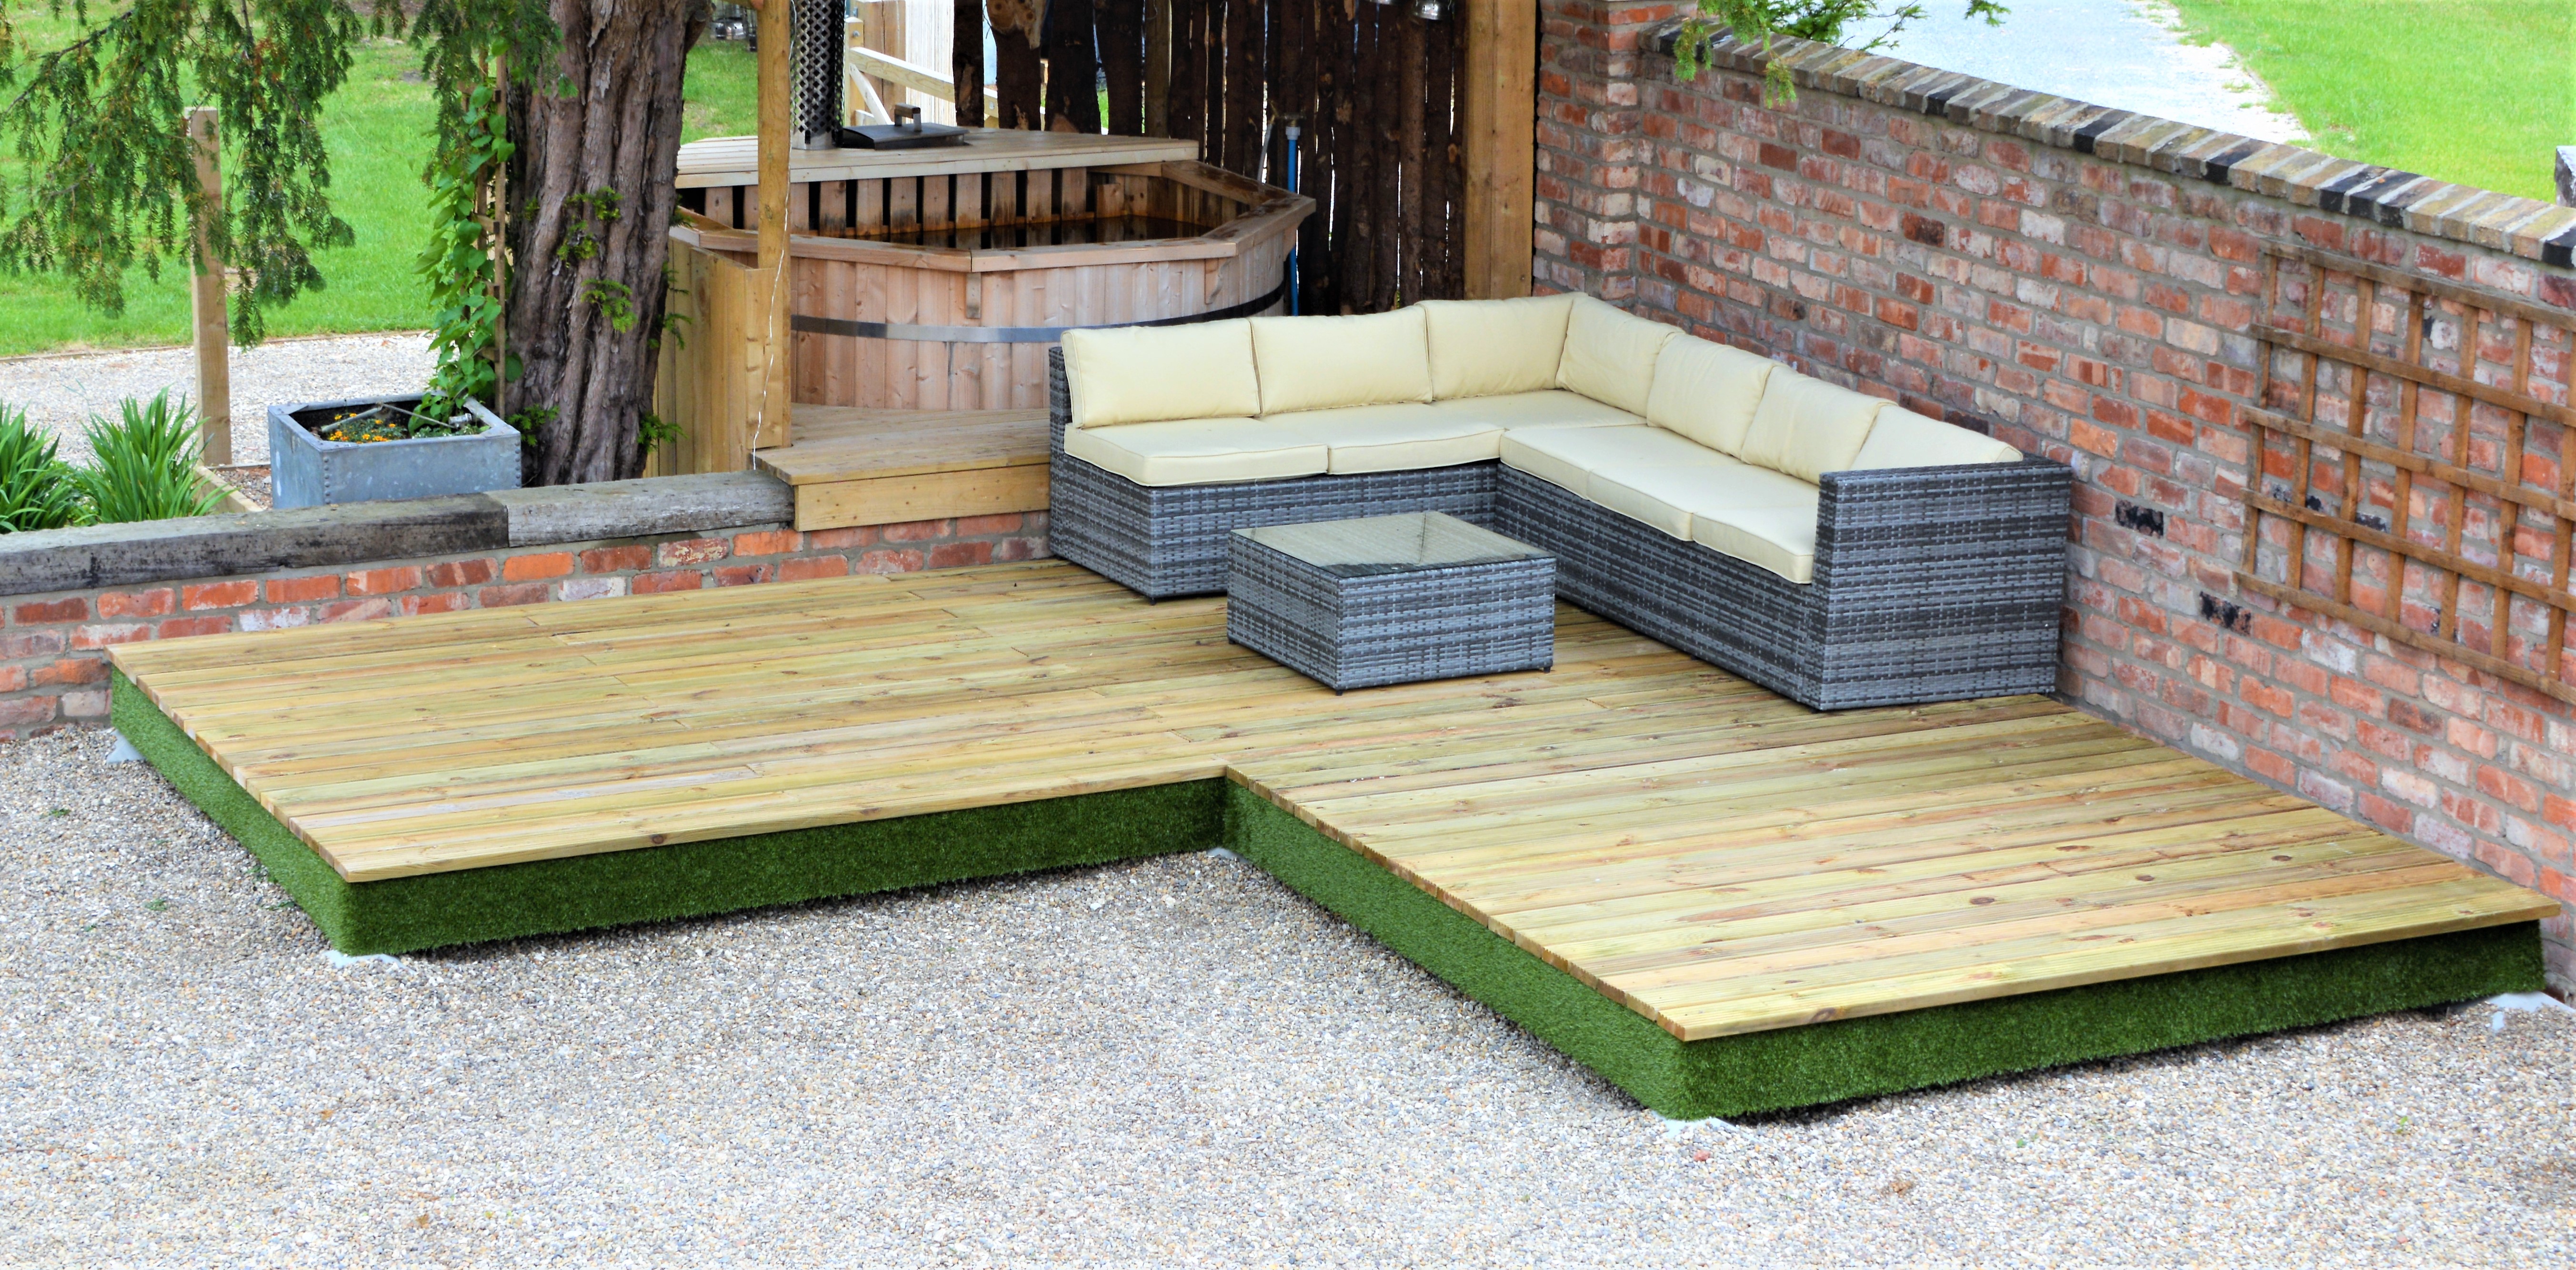 Swift Deck Self-Assembly Garden Decking Kit Corner With Adjustable Foundations - 4.75 x 4.7m